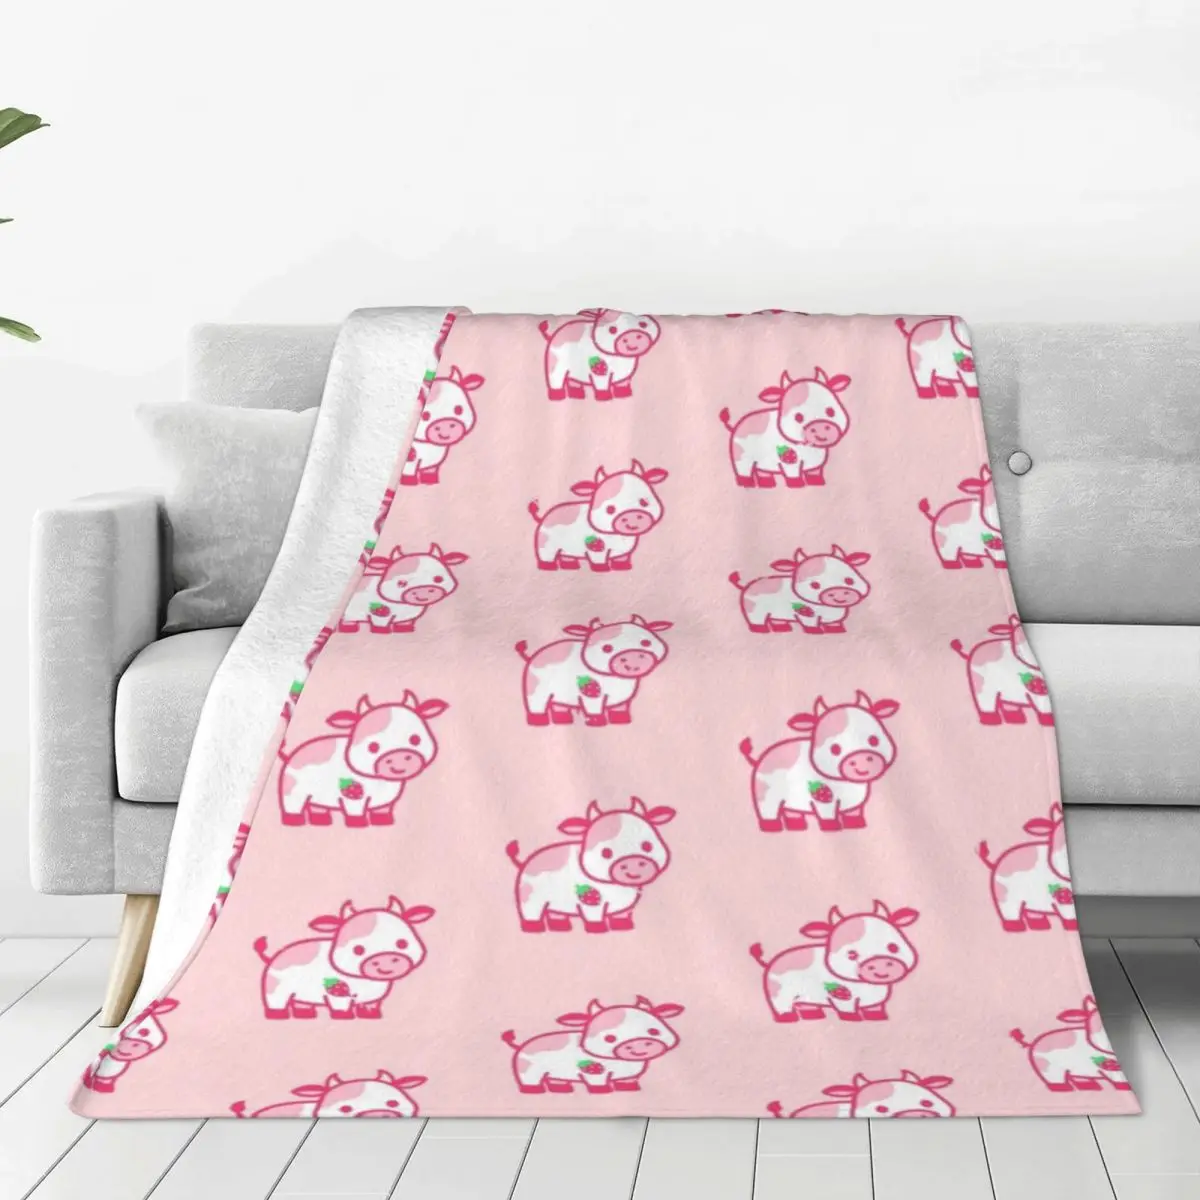 

Strawberry Cow Cute Blankets for Kids Animal Cartoon Flannel Awesome Warm Throw Blanket for Coverlet All Season